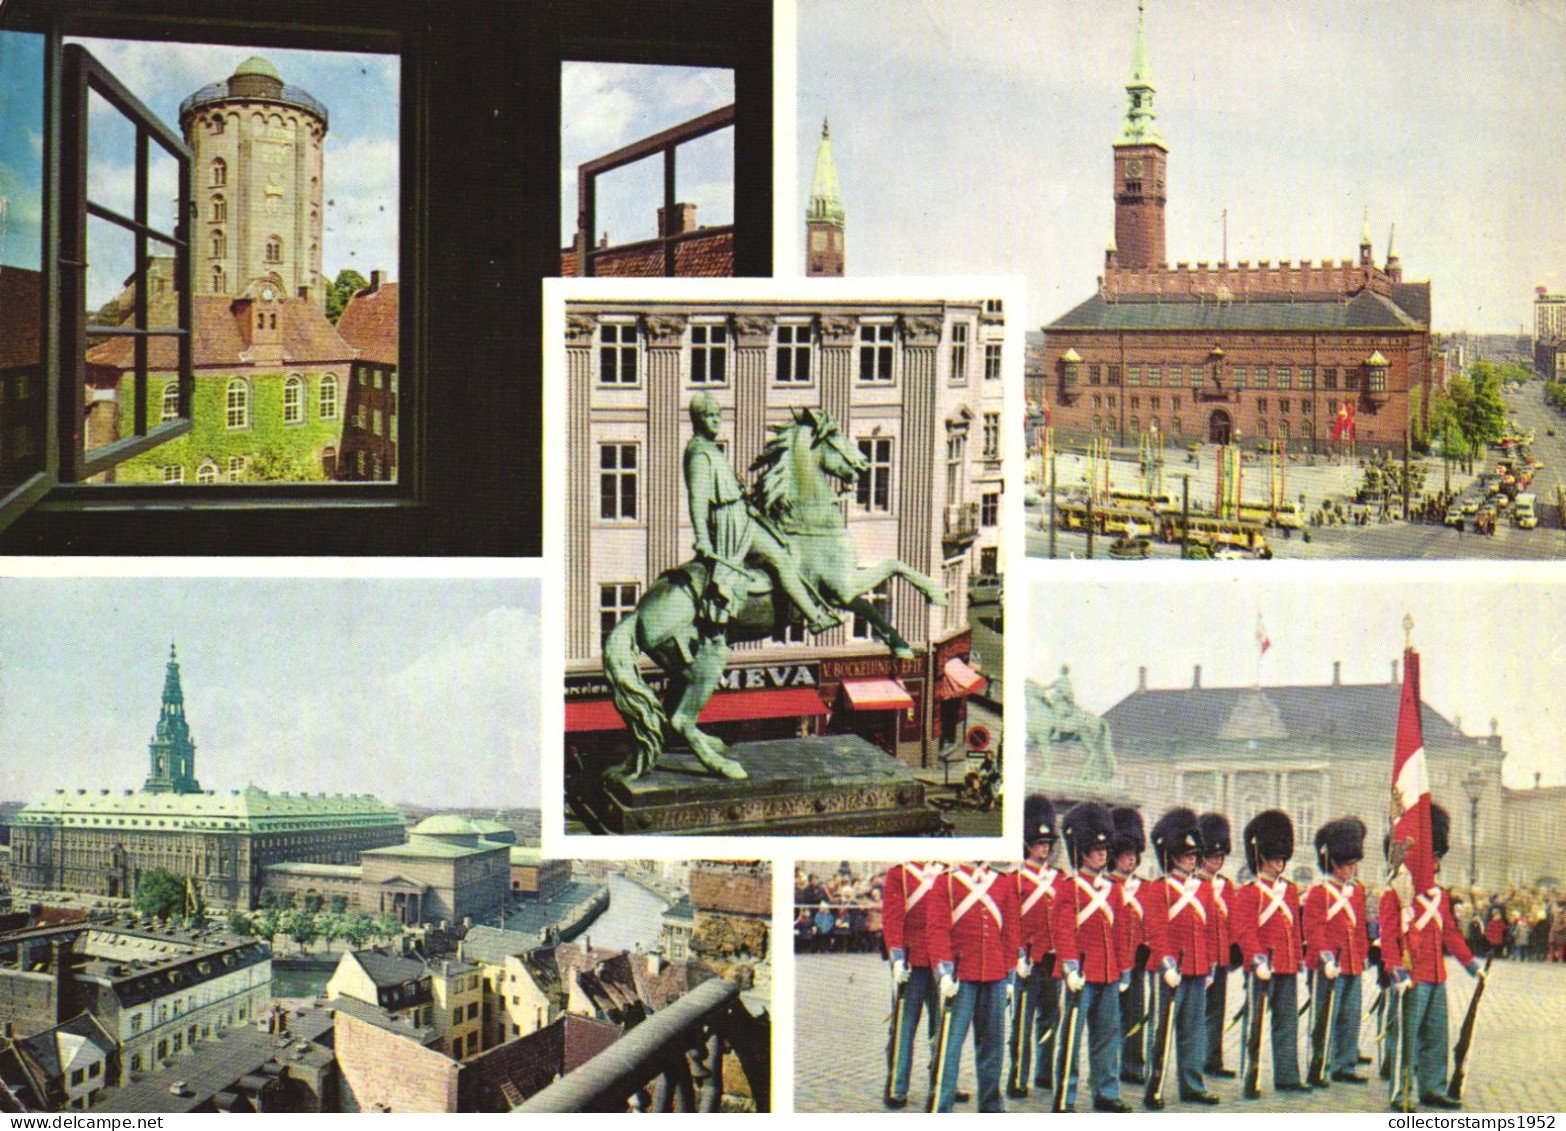 MULTIPLE VIEWS, ARCHITECTURE, TOWN HALL, ROUND TOWER, STATUE, HORSE, CARS, GUARDS, FLAG, CHRISTIANSBORG,DENMARK,POSTCARD - Danimarca